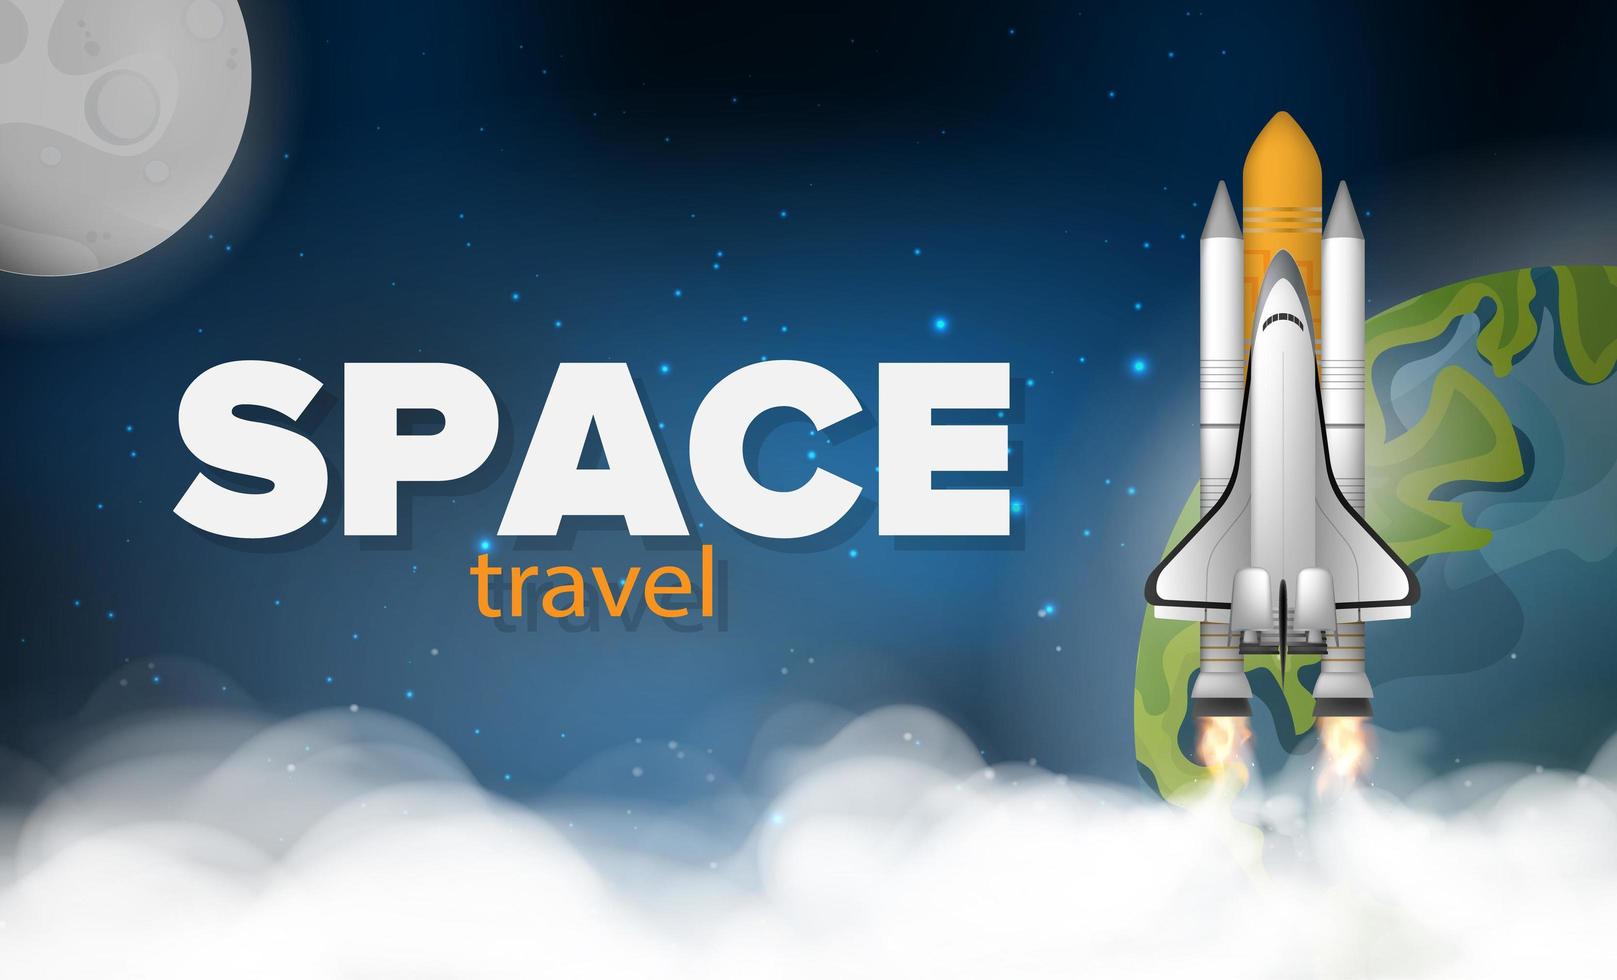 Space travel banner. A rocket or shuttle flies through space against the background of space, the planet earth and the moon. Realistic style. Vector illustration.